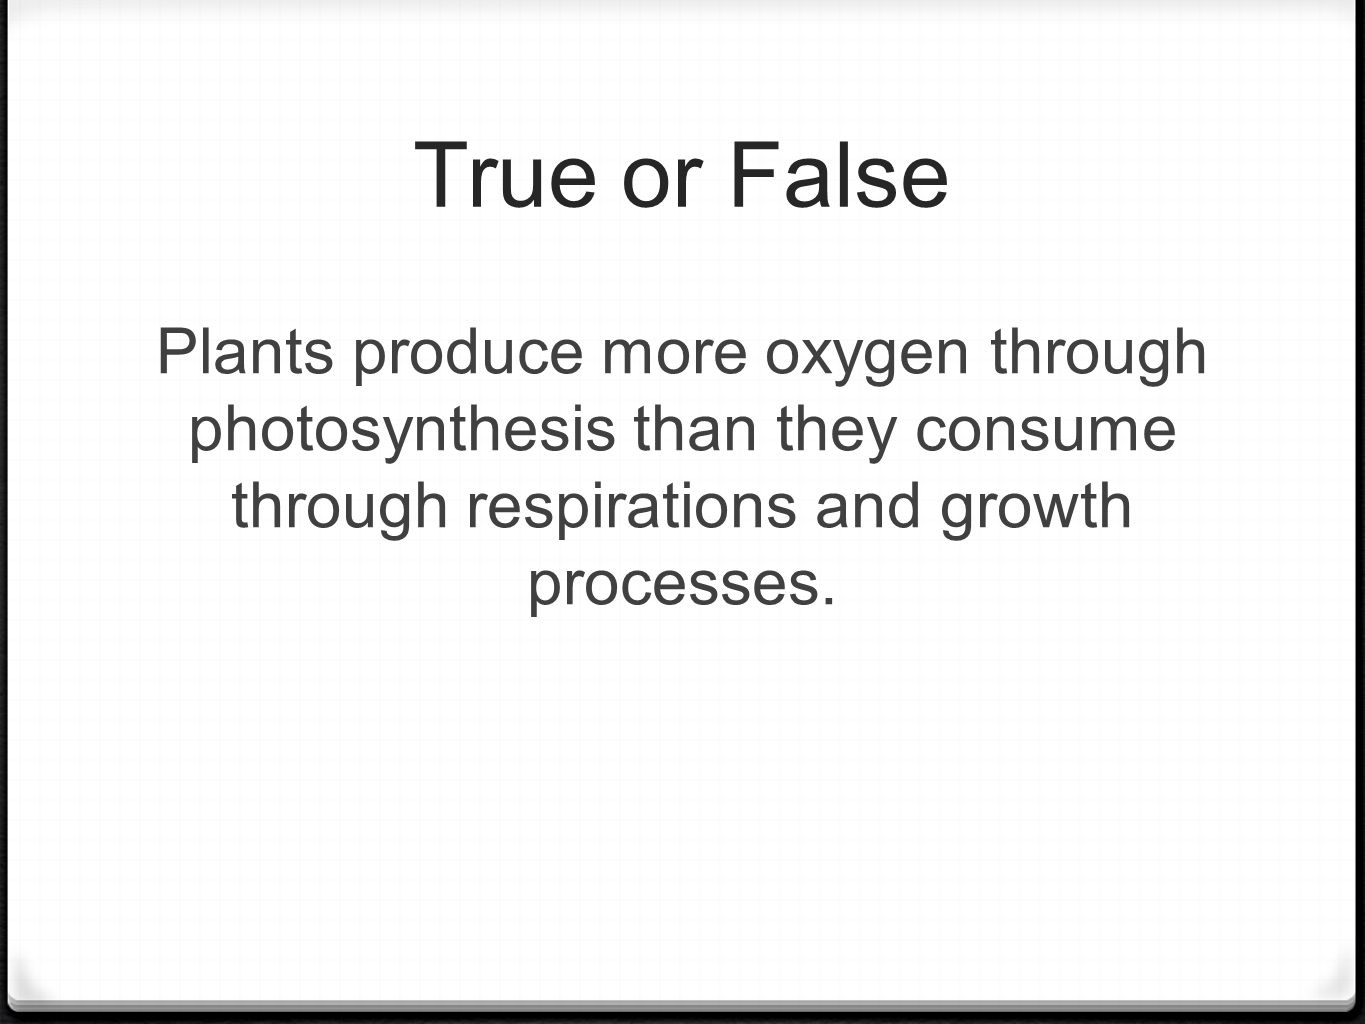 True or False Plants produce more oxygen through photosynthesis than they consume through respirations and growth processes.